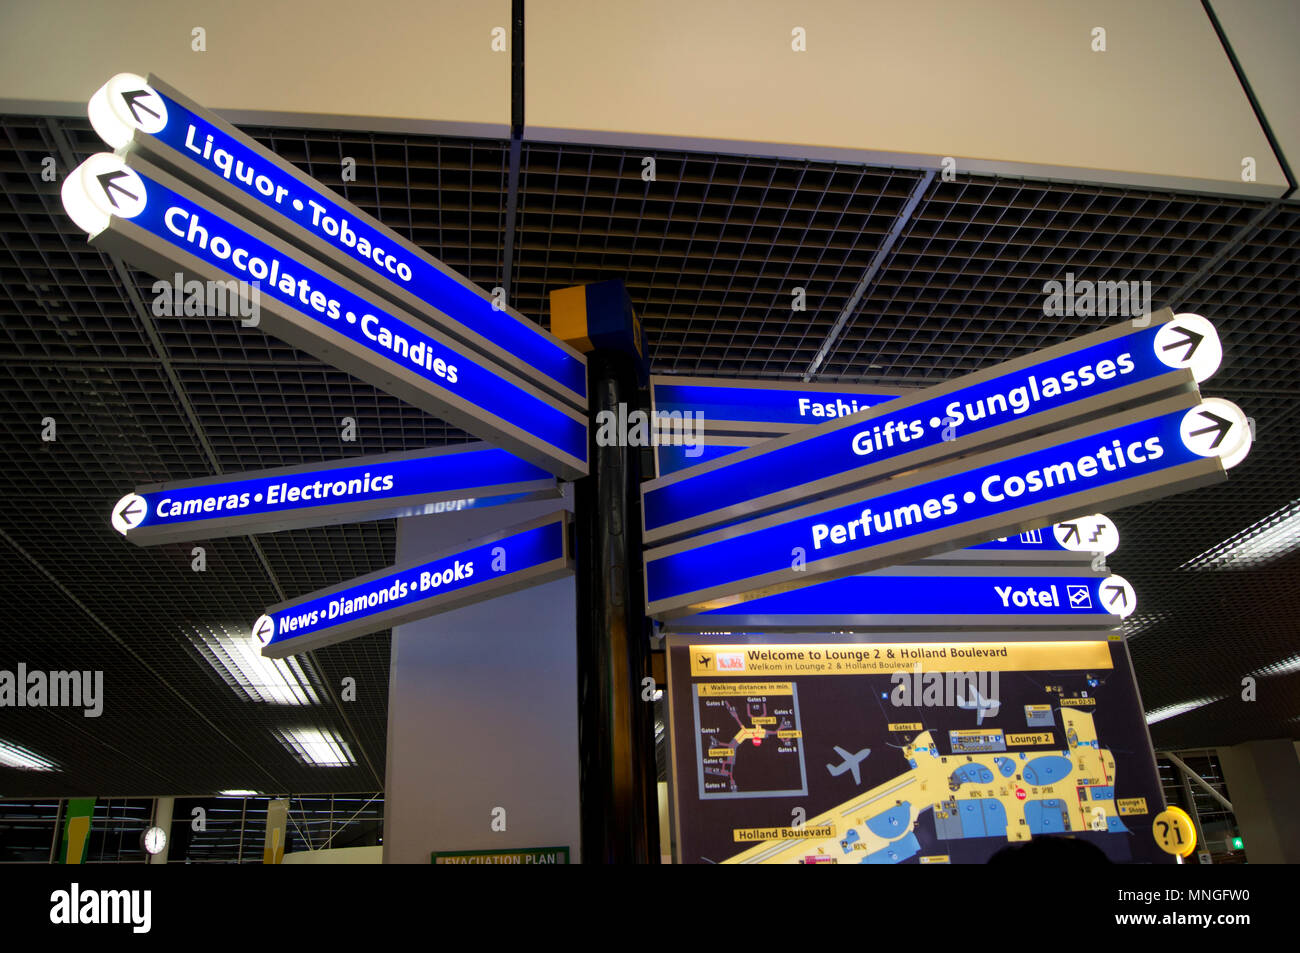 Signpost in the departure lounge at Schiphol International Airport in Amsterdam, The Netherlands, indicating the direction of shops. Stock Photo